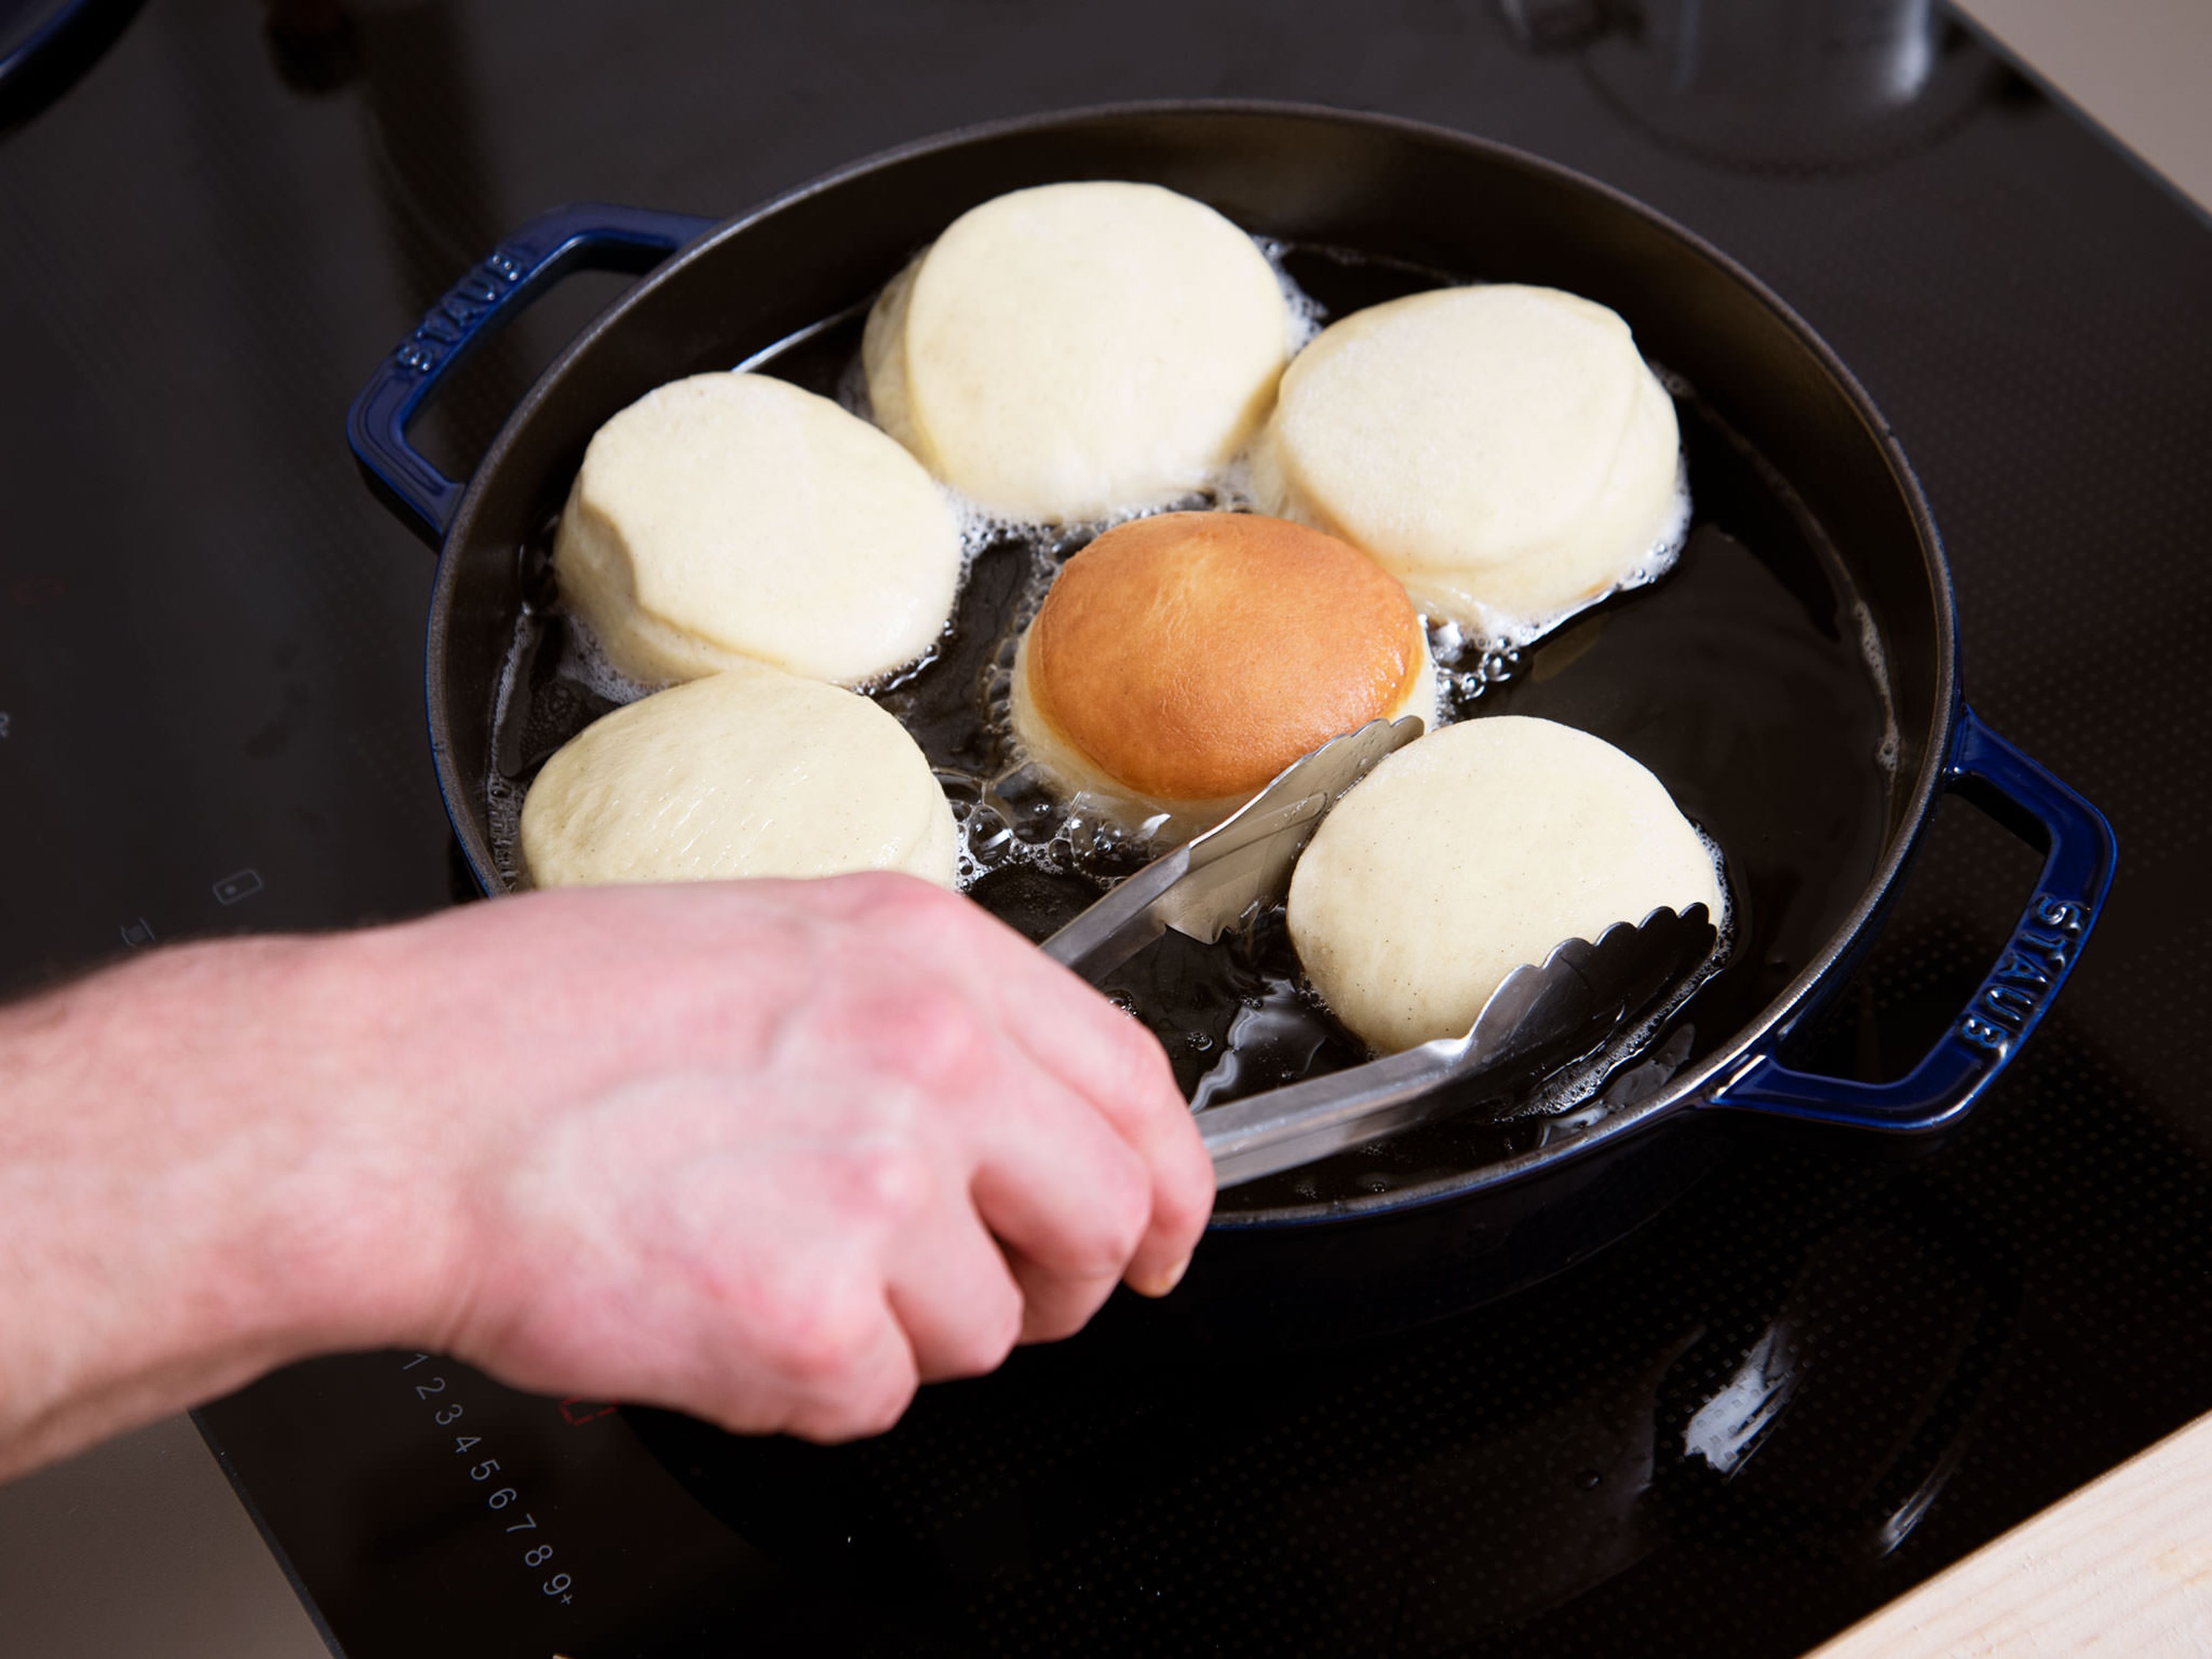 Add oil to a pot and heat until it reaches 170°C/340°F. Carefully add dough circles one by one, then close lid and let fry for approx. 2 – 3 min. Flip carefully and let fry on the other side for approx 2 – 3 min. more. Remove doughnuts from pot and drain on a paper towel-lined plate.